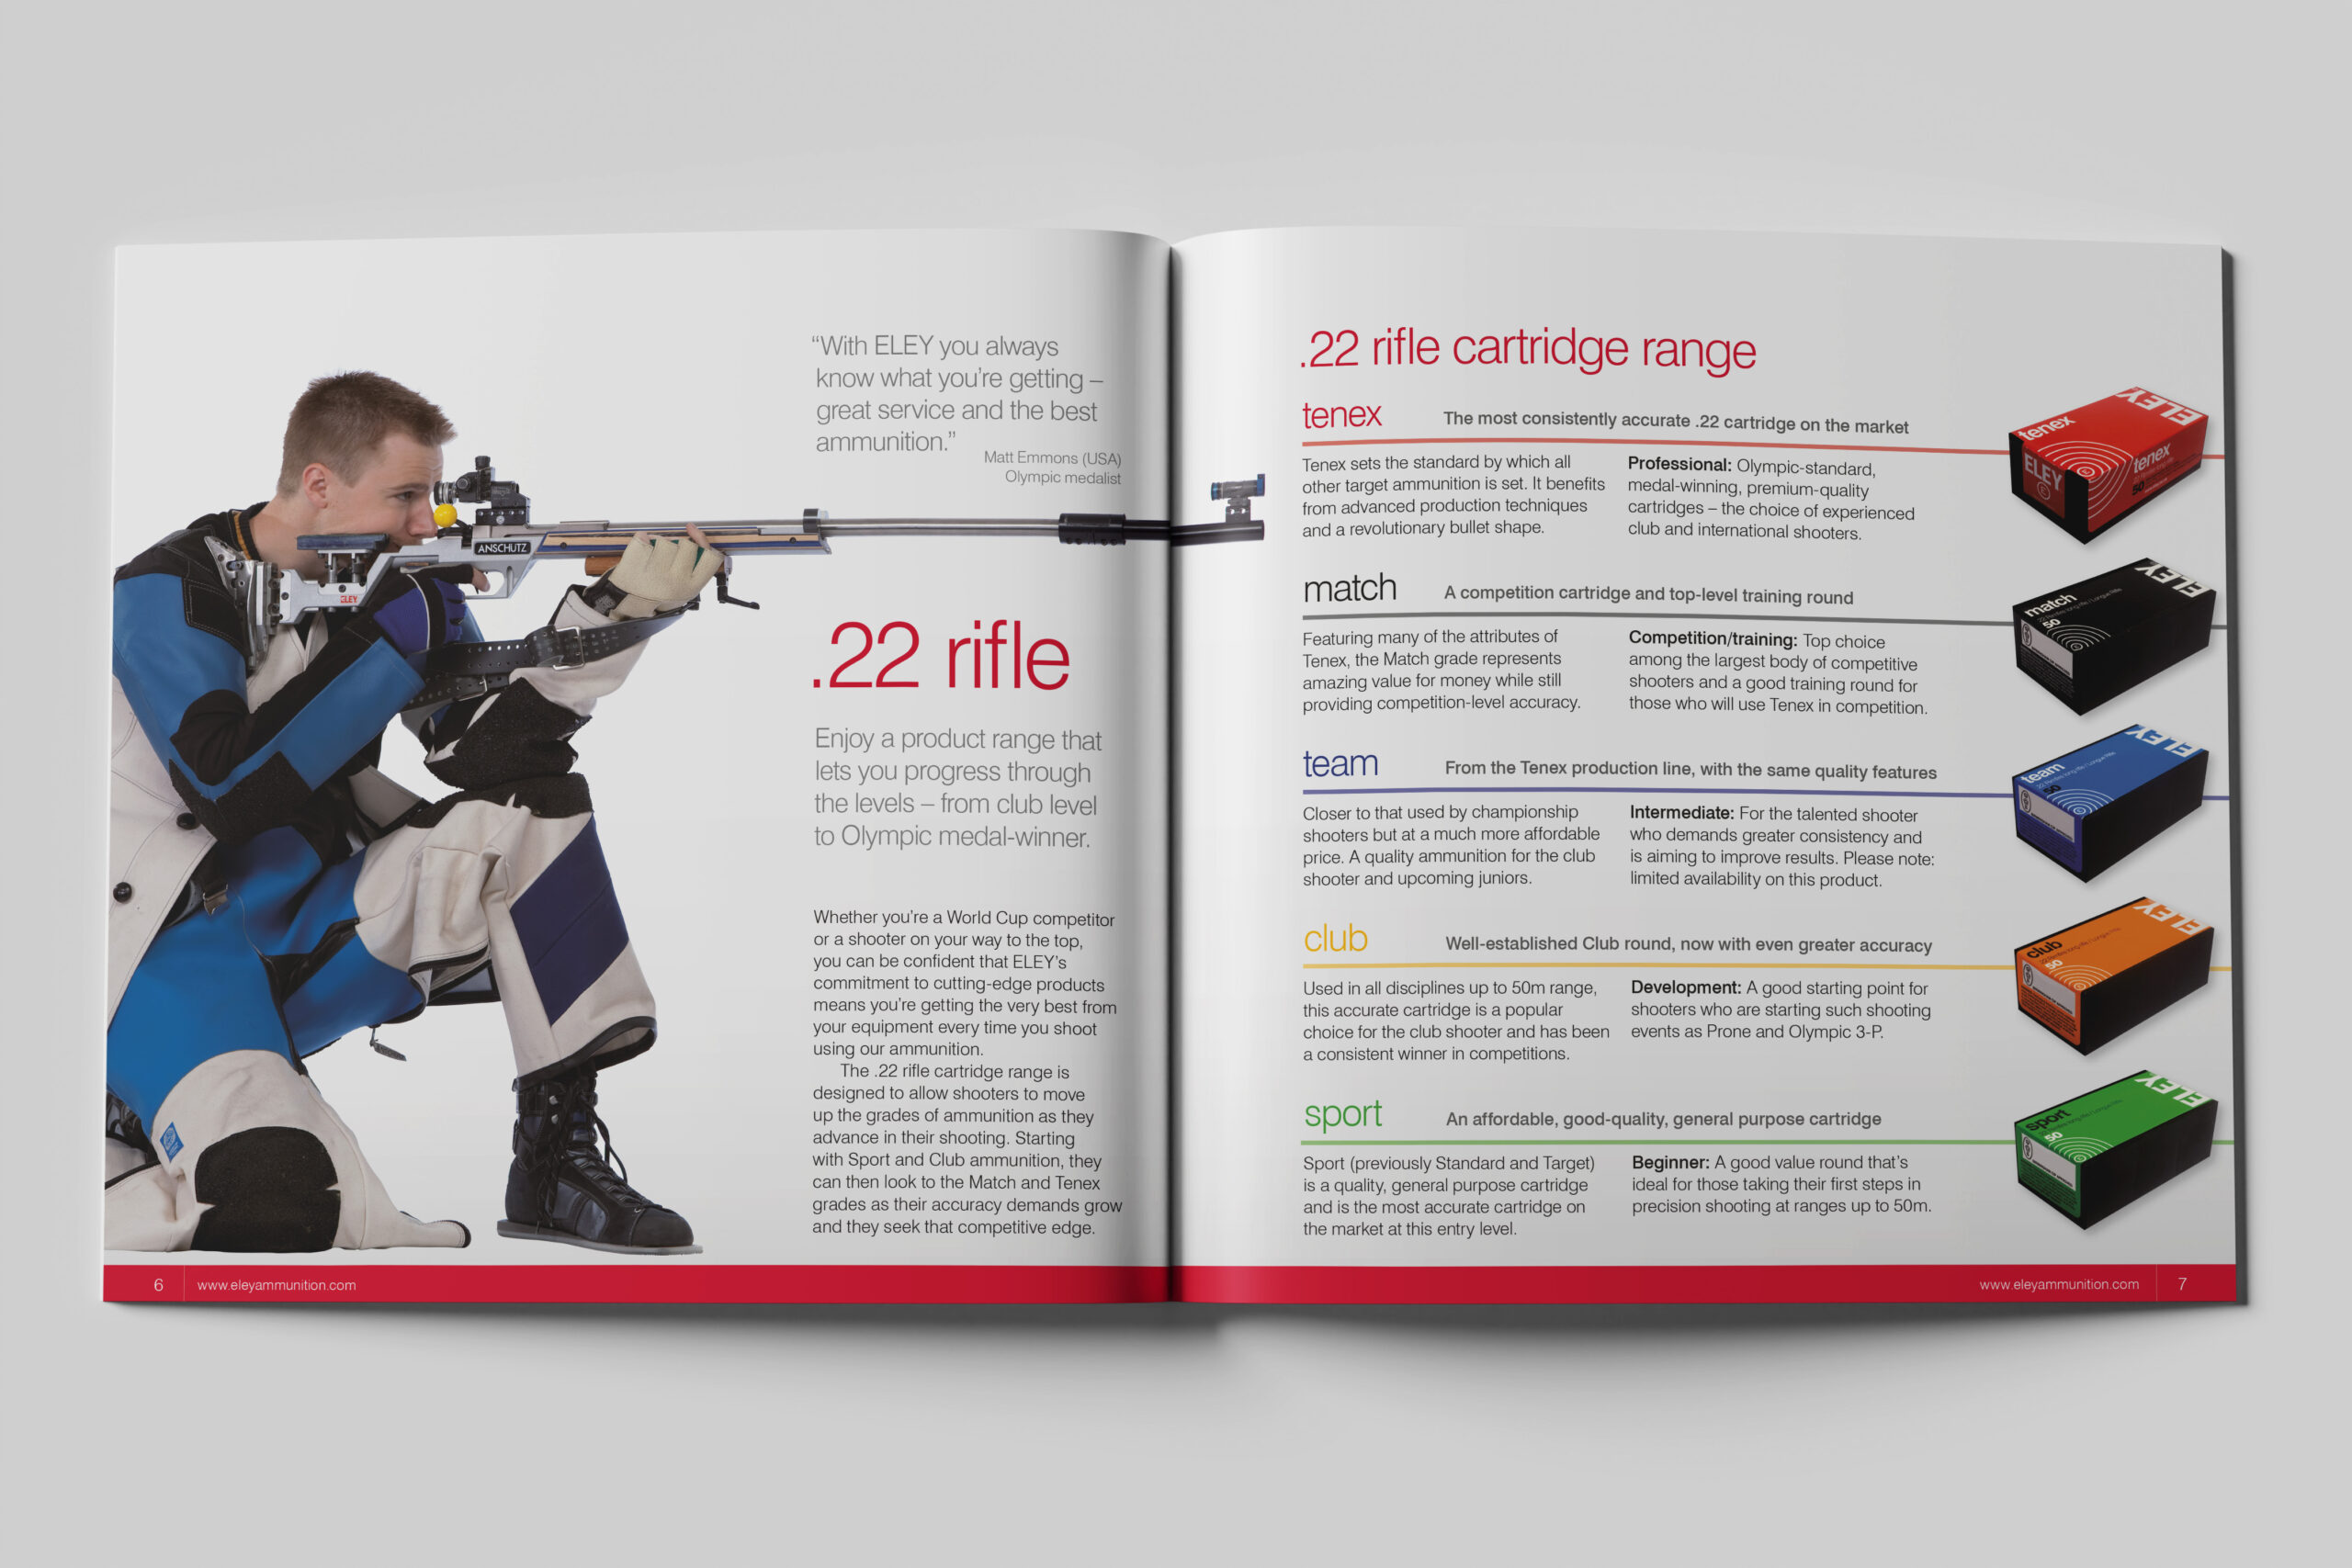 Double page spread from the Eley 2010 Worldwide catalogue. The spread shows a profile image of a competitive rifle shooter taking aim on the left hand side. The right hand side shows boxes of each Eley .22 rifle cartridge product alongside descriptions.